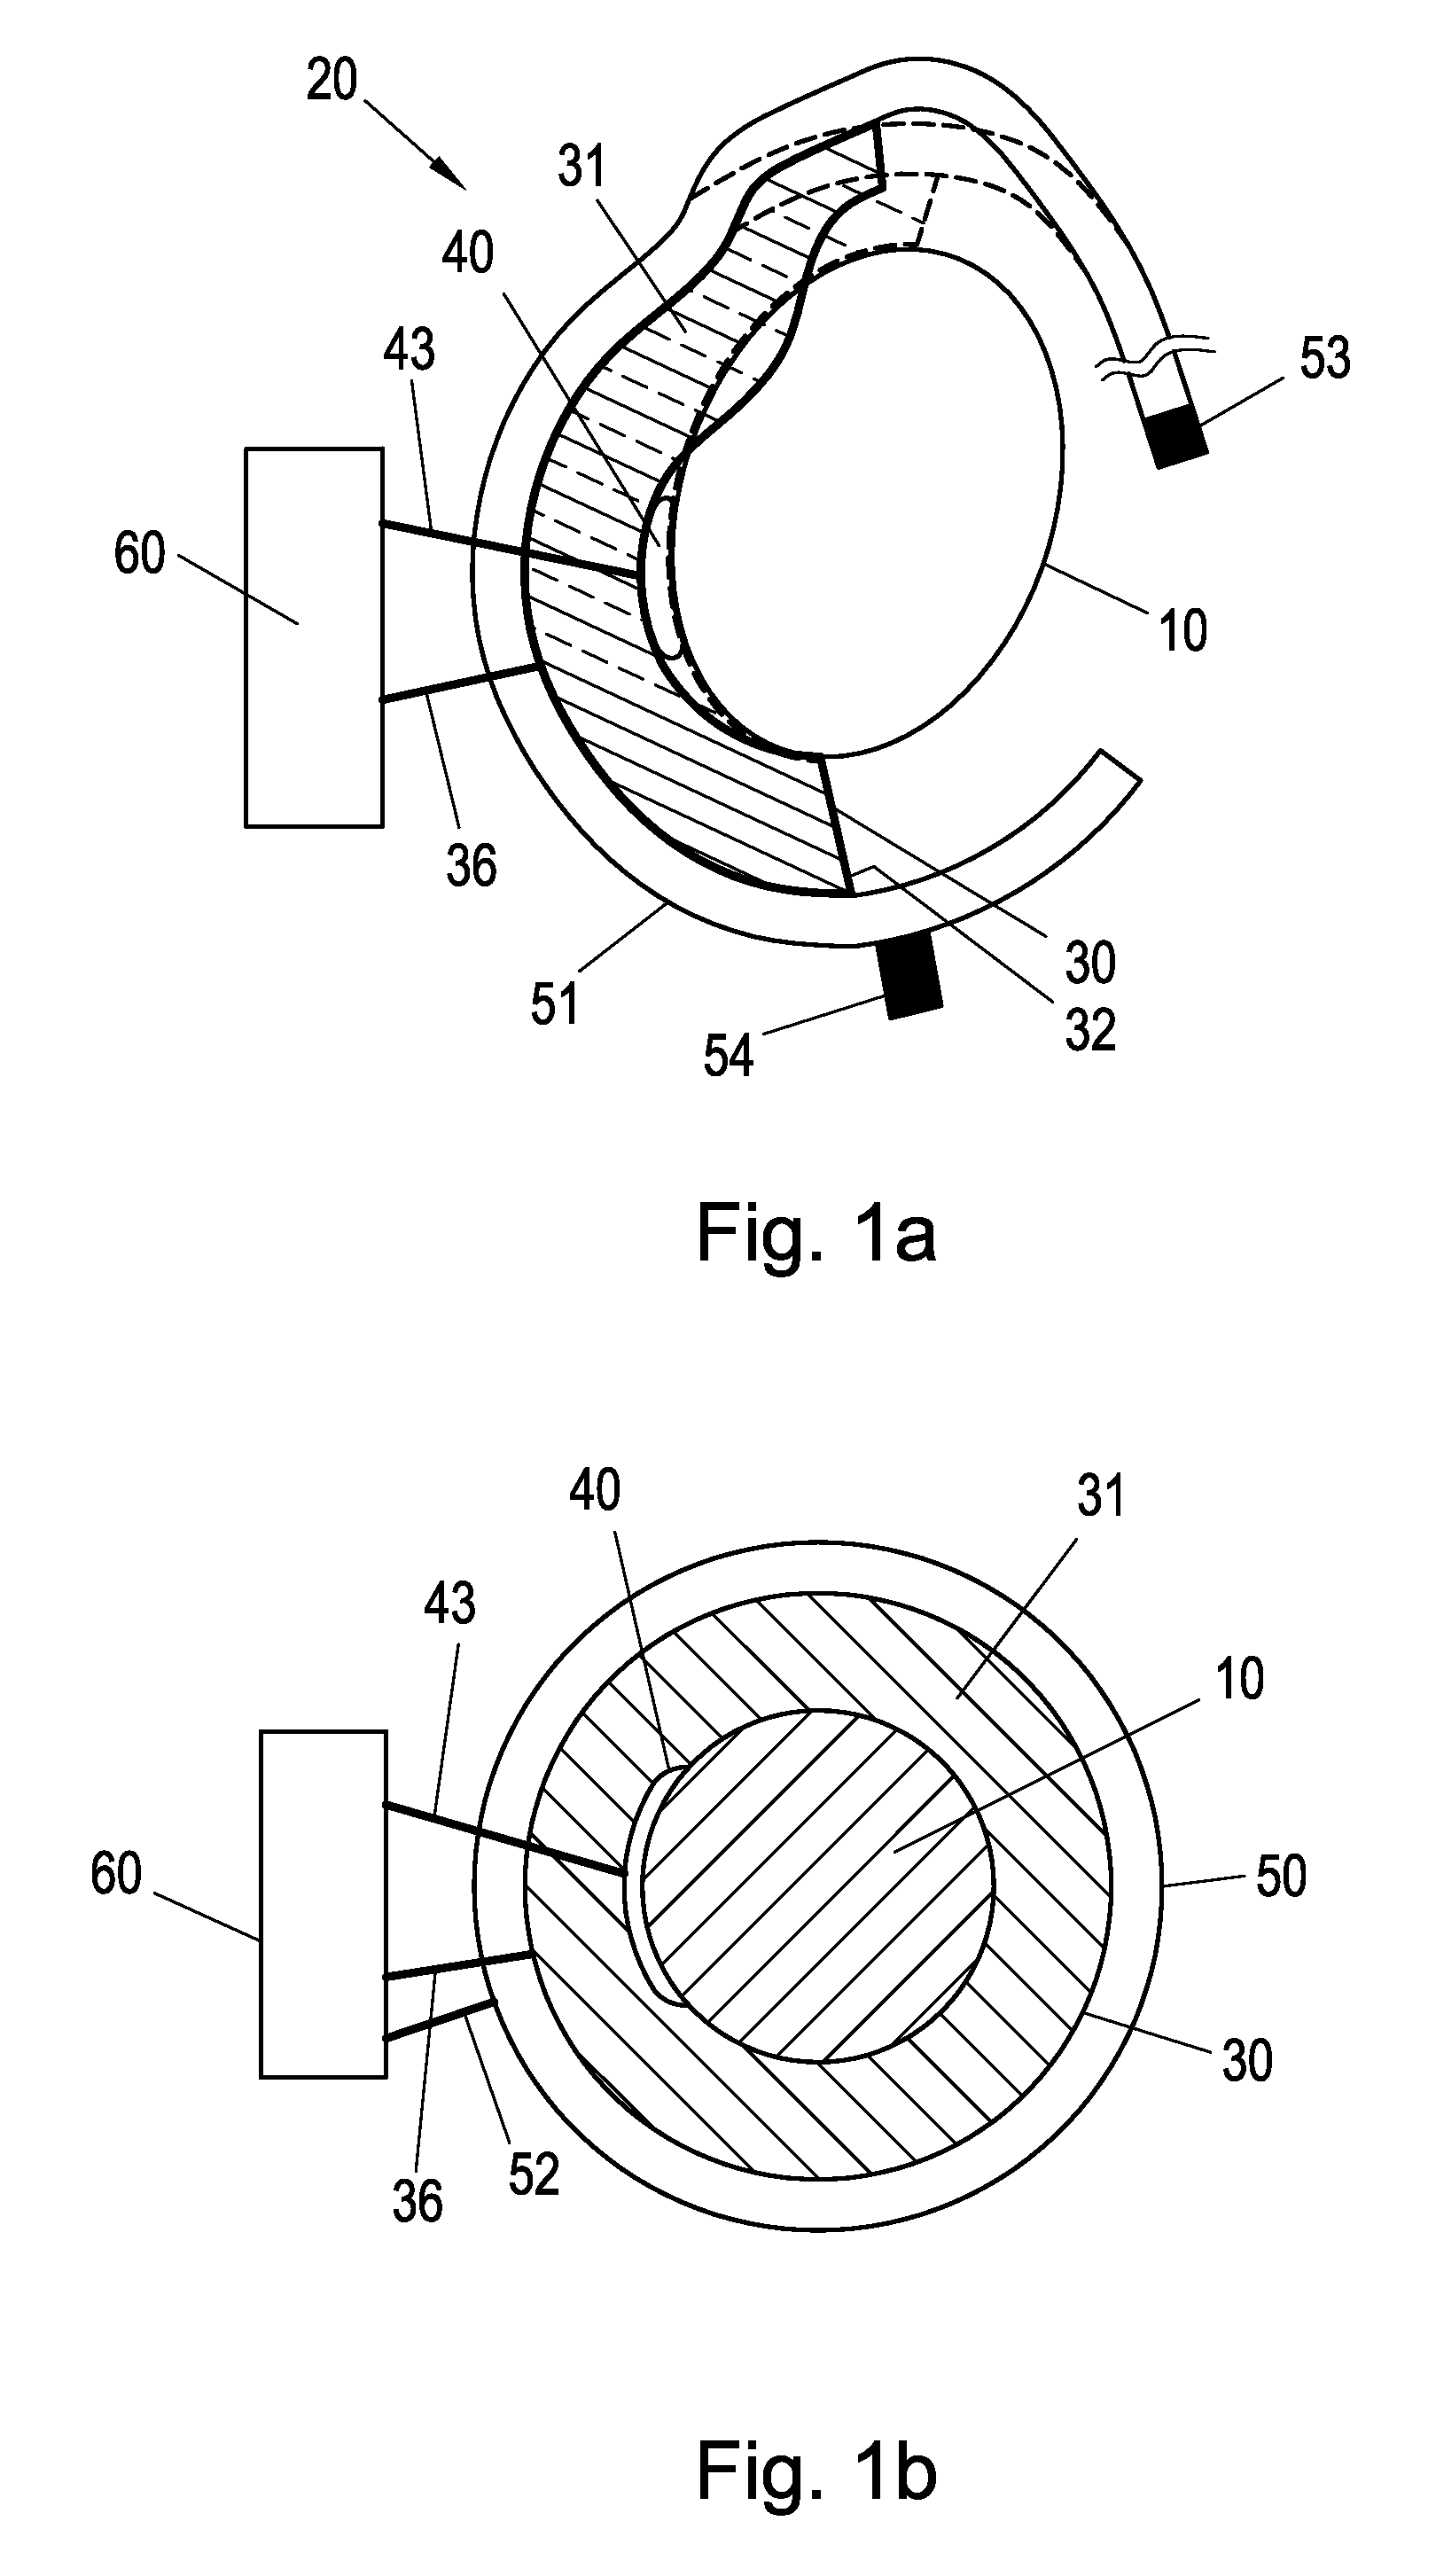 Blood Pressure Measuring Device and Method for Measuring the Blood Pressure of a Living Being